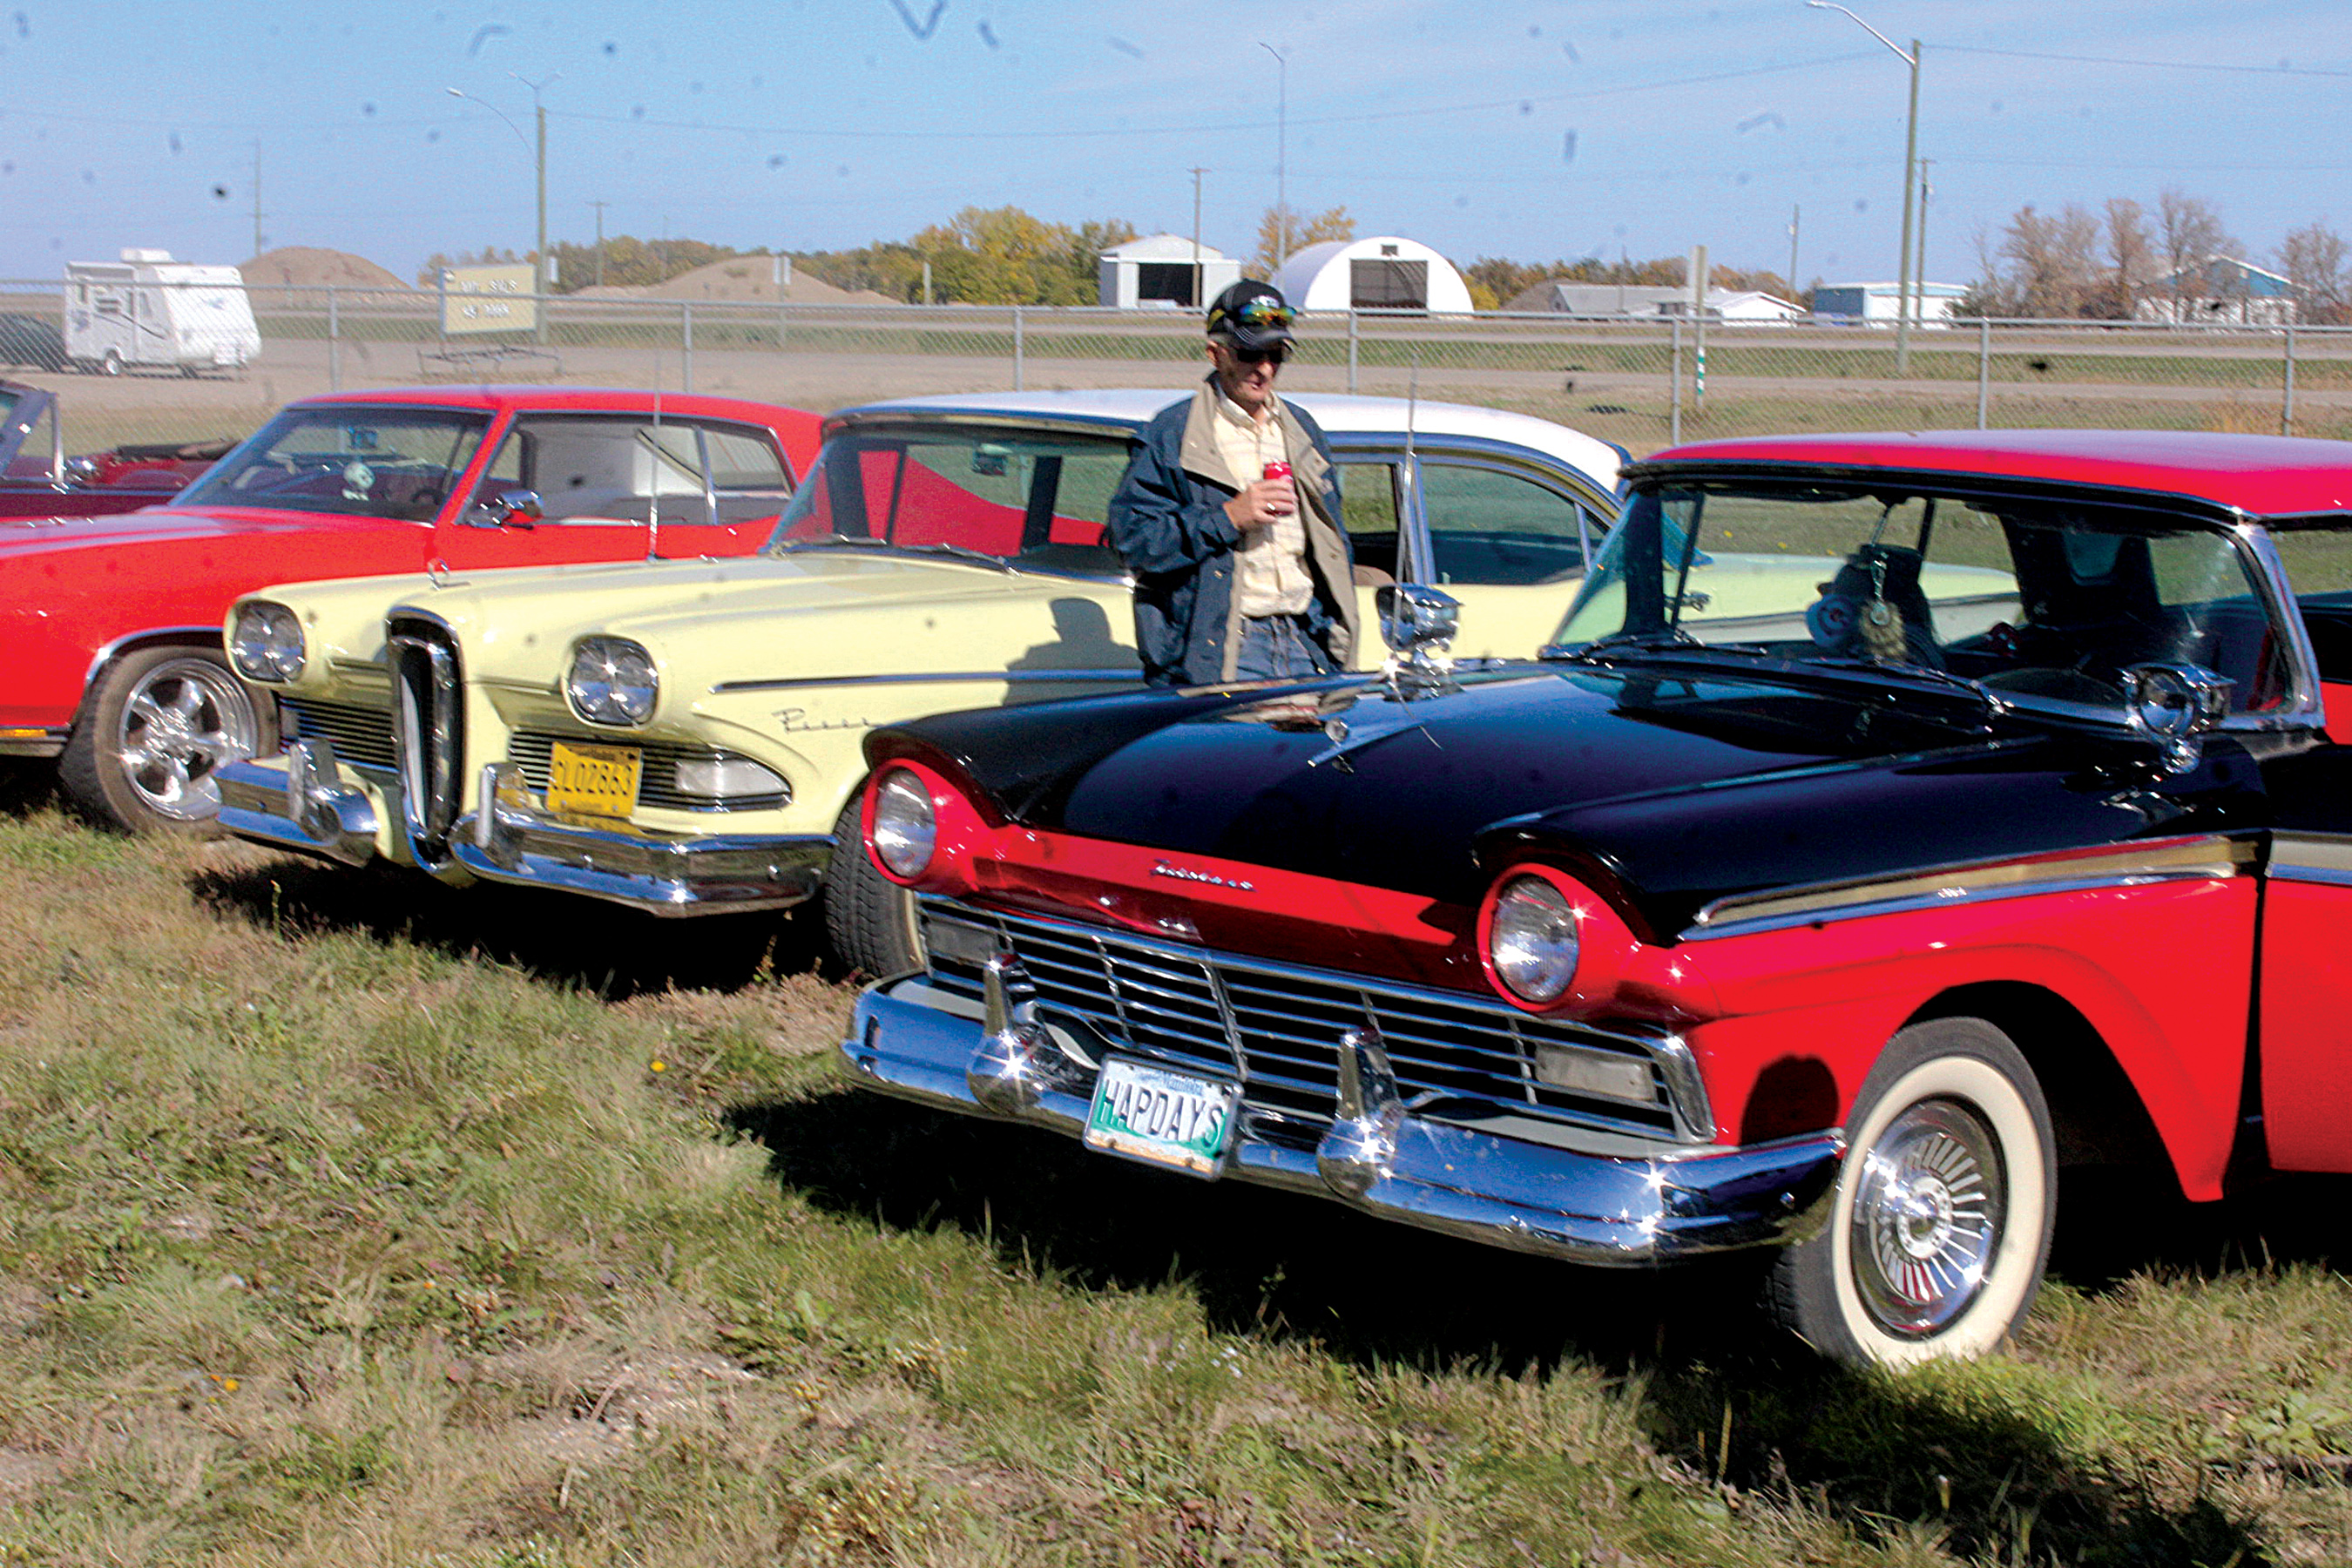 Some of the classic cars on display during the car rally.